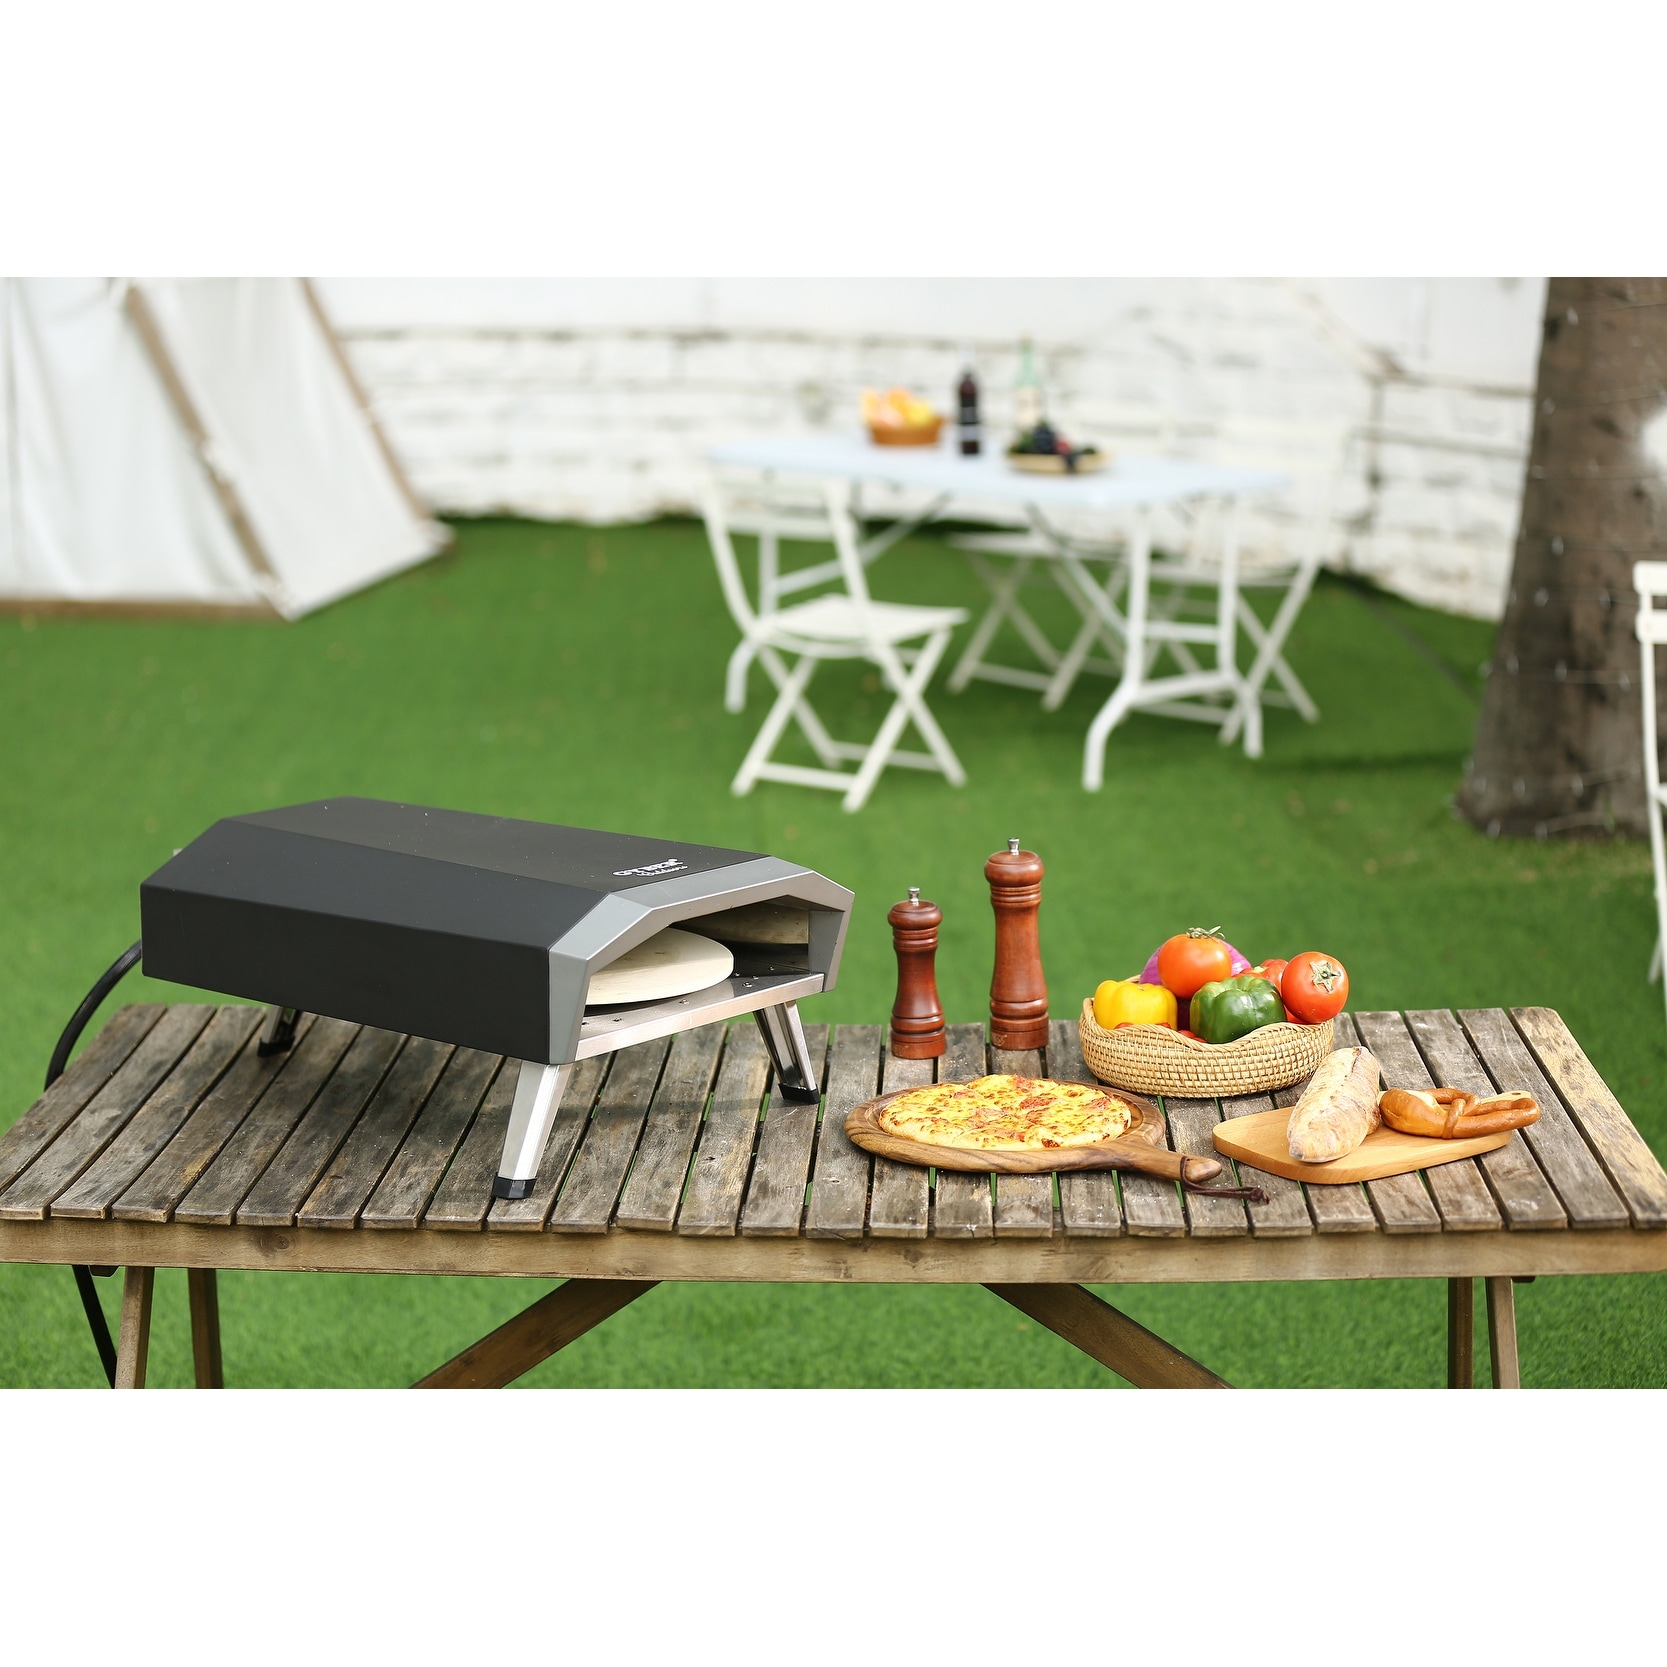 Gyber Mateo Portable 29 in. Gas Burning Pizza Oven